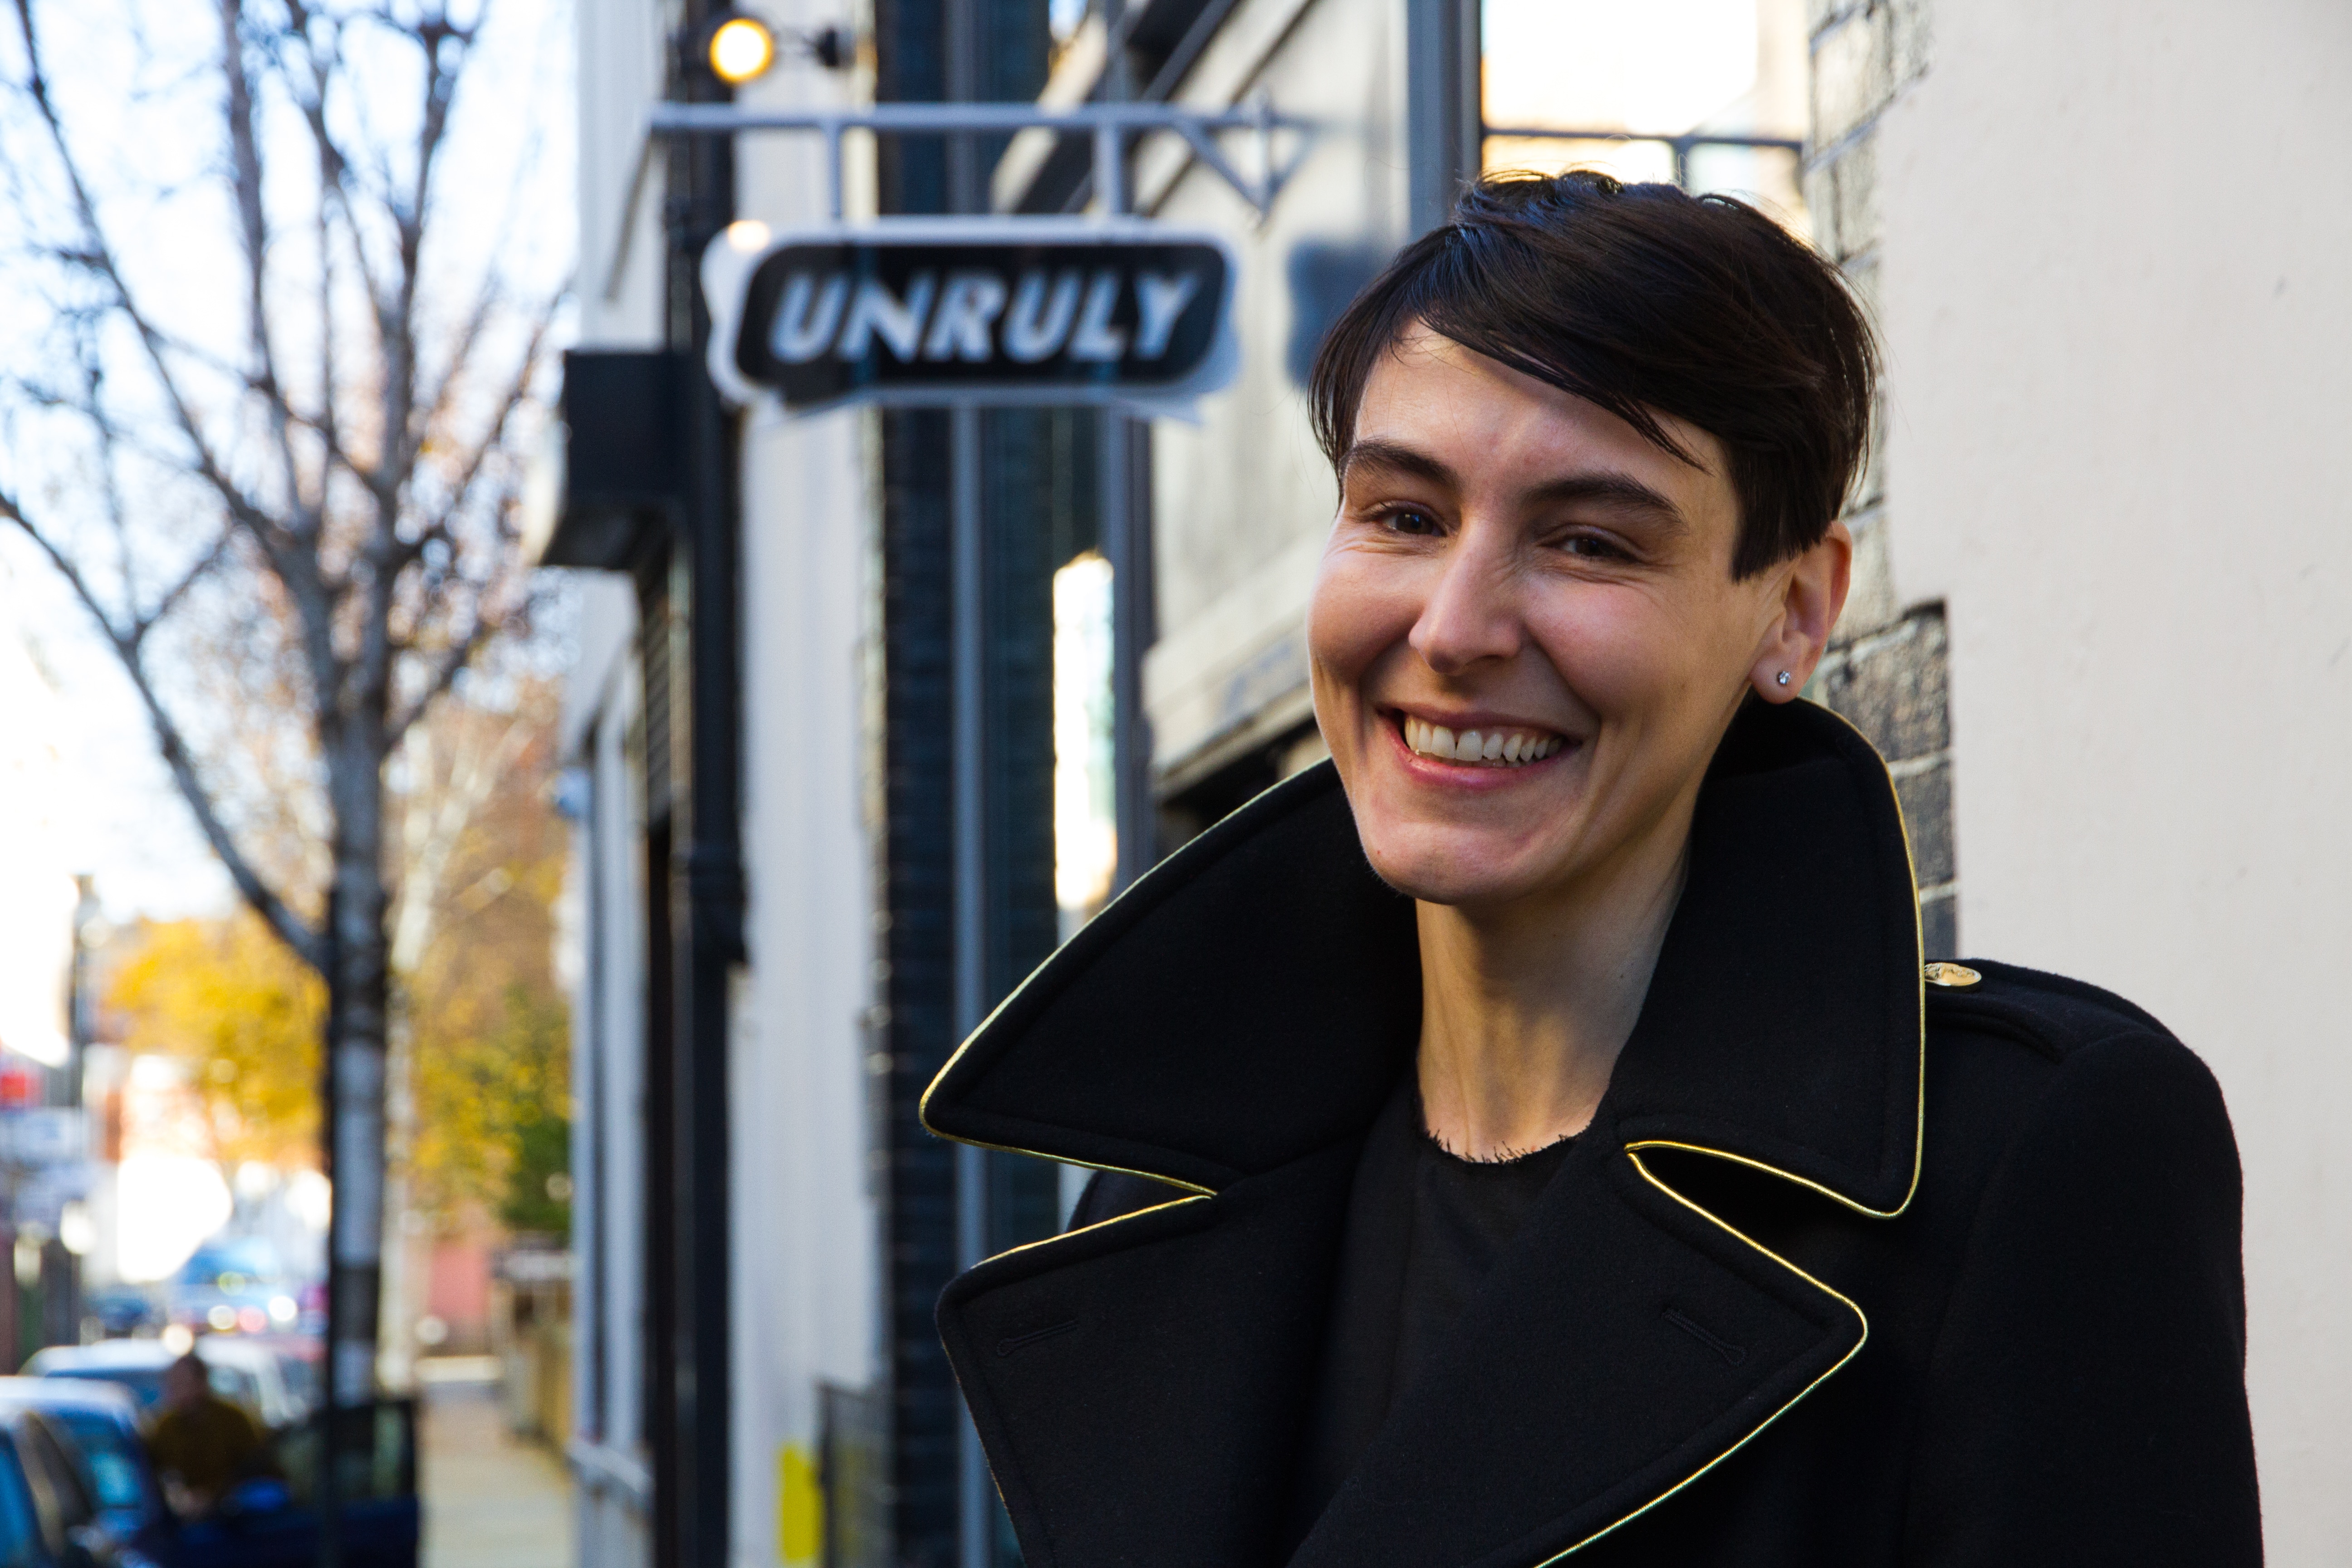 Unruly Co-Founder Sarah Wood Named In Debrett’s 500 List Of The Most Influential People In Britain